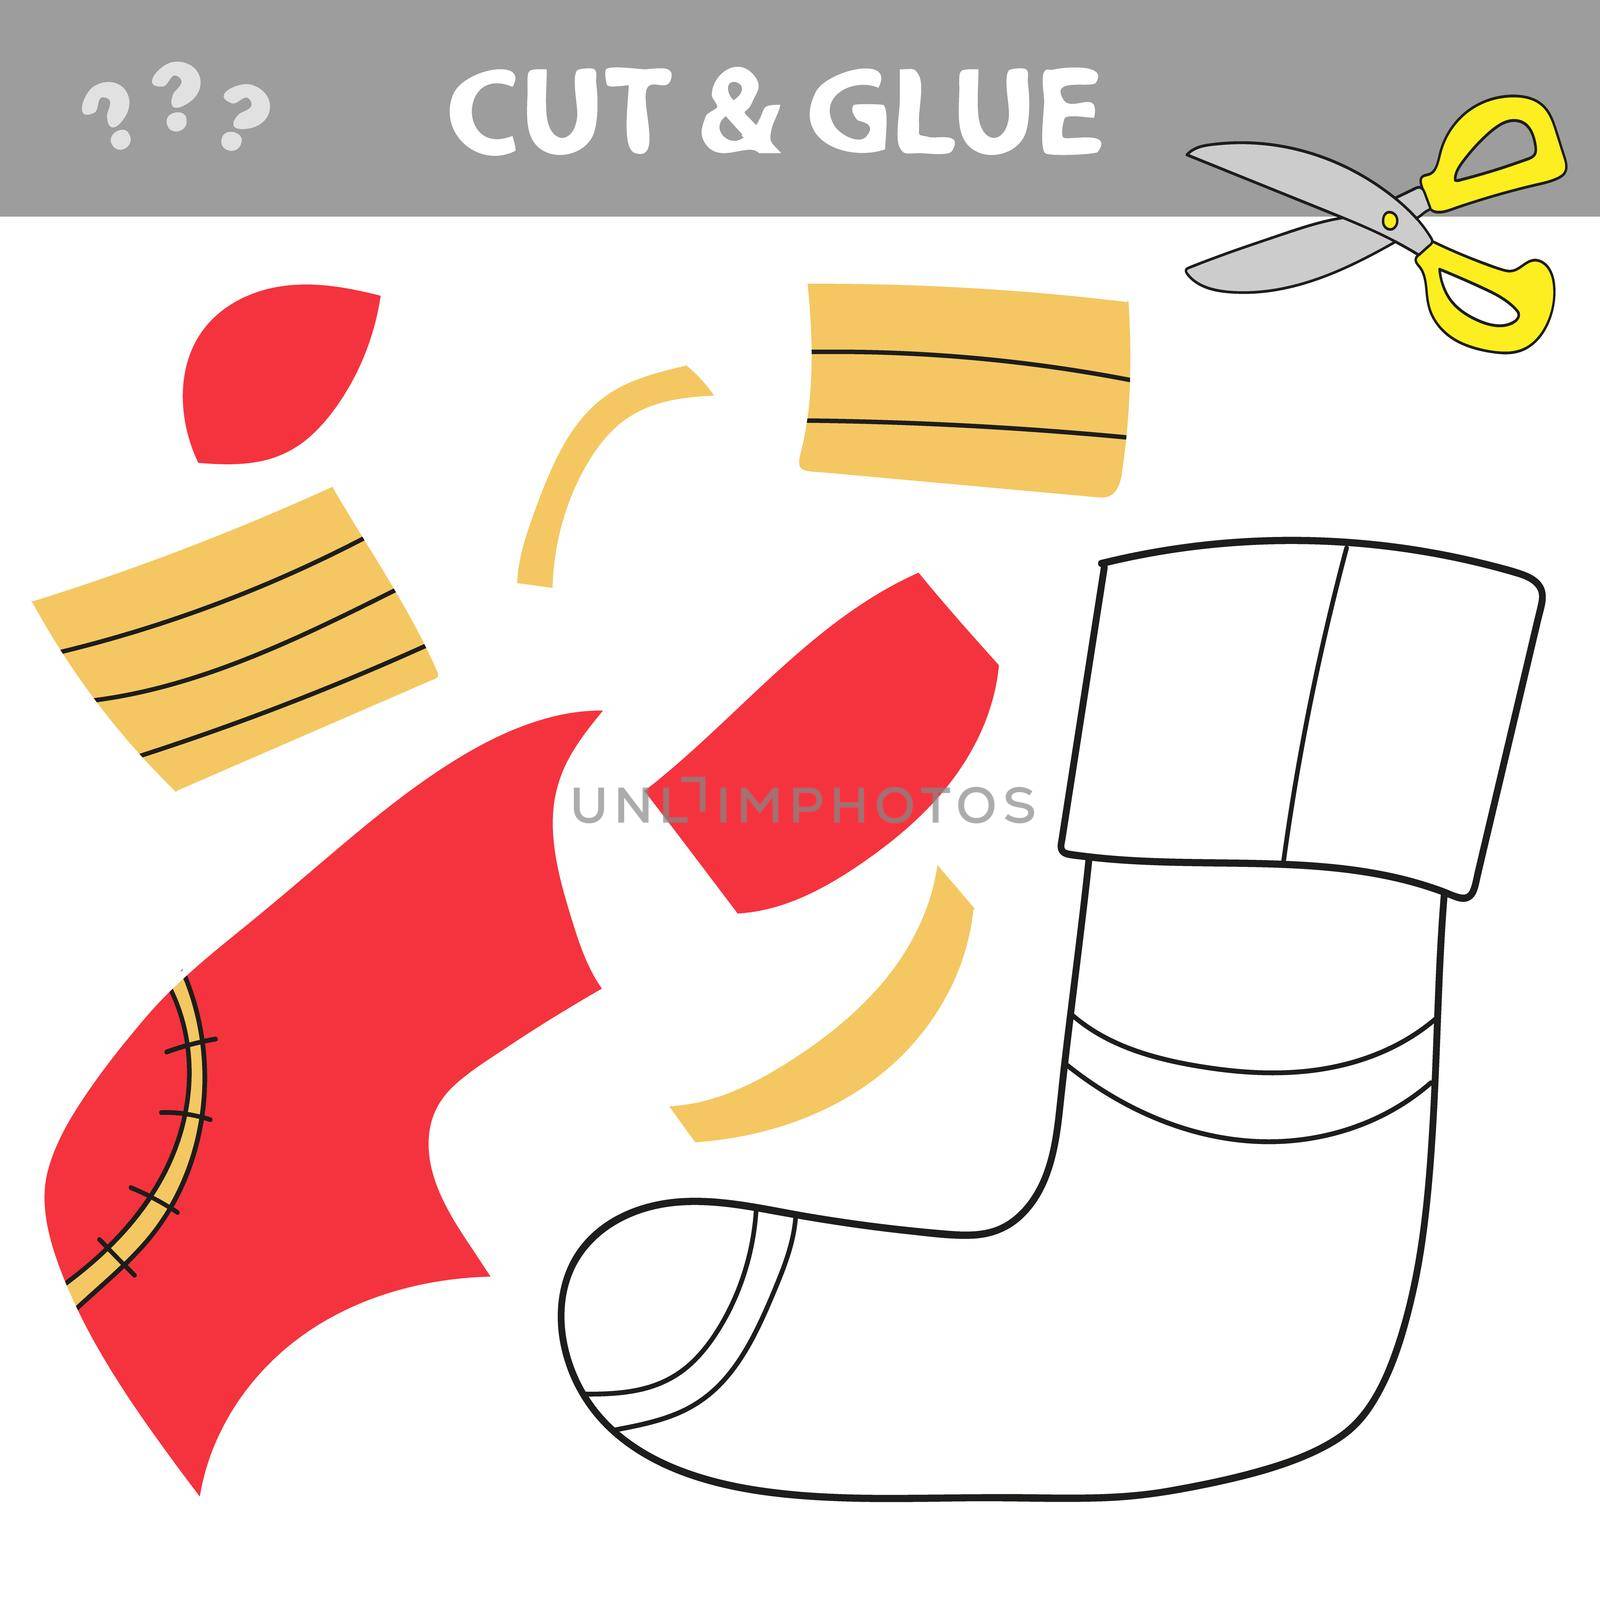 Cut and glue - Simple game for kids. Cut parts of Socks and glue them. Educational children game, printable worksheet, vector illustration